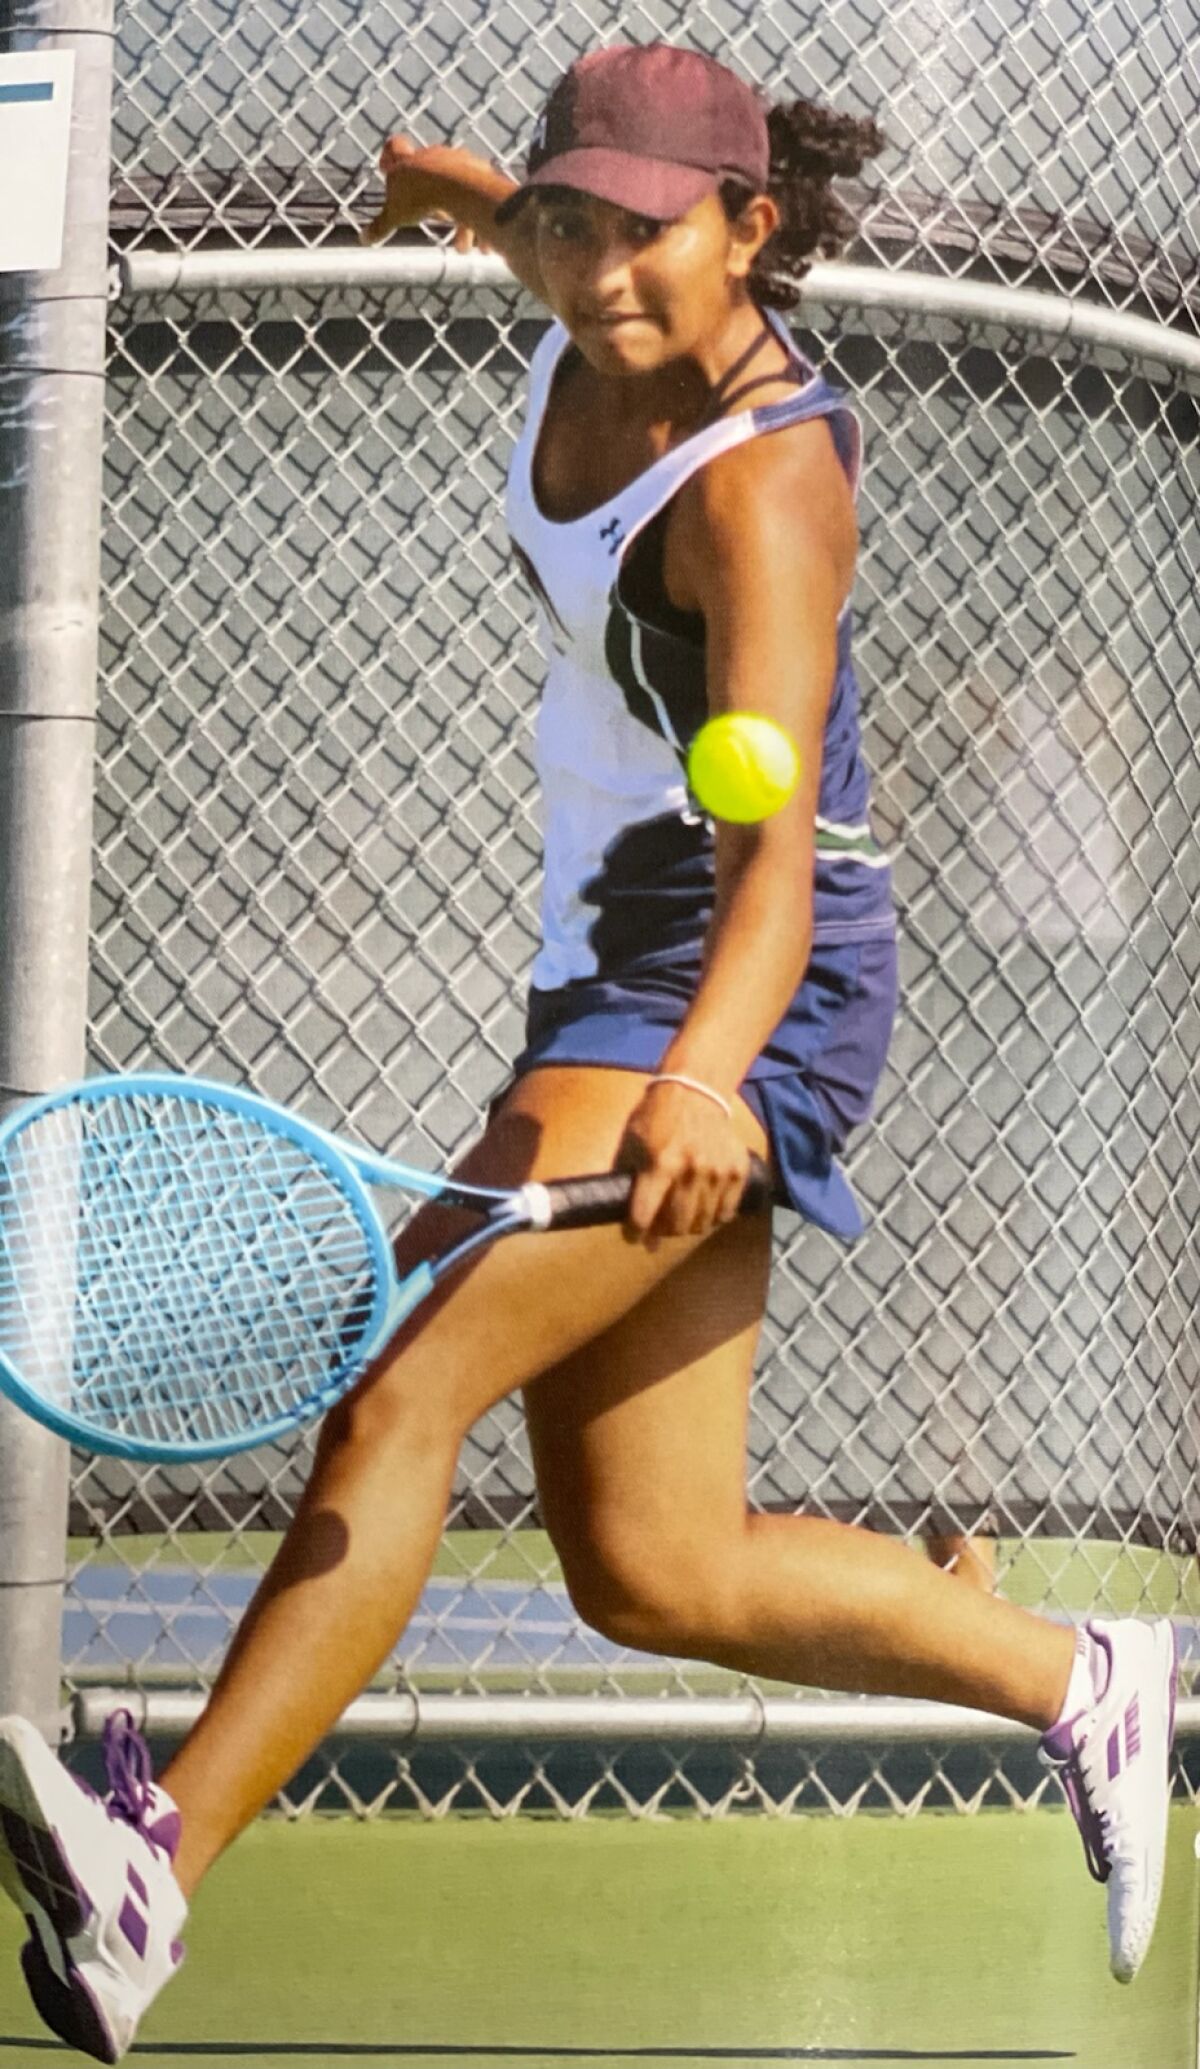 The Nighthawks have four major players this season, including senior Arushi Rai, who will play either singles or doubles.